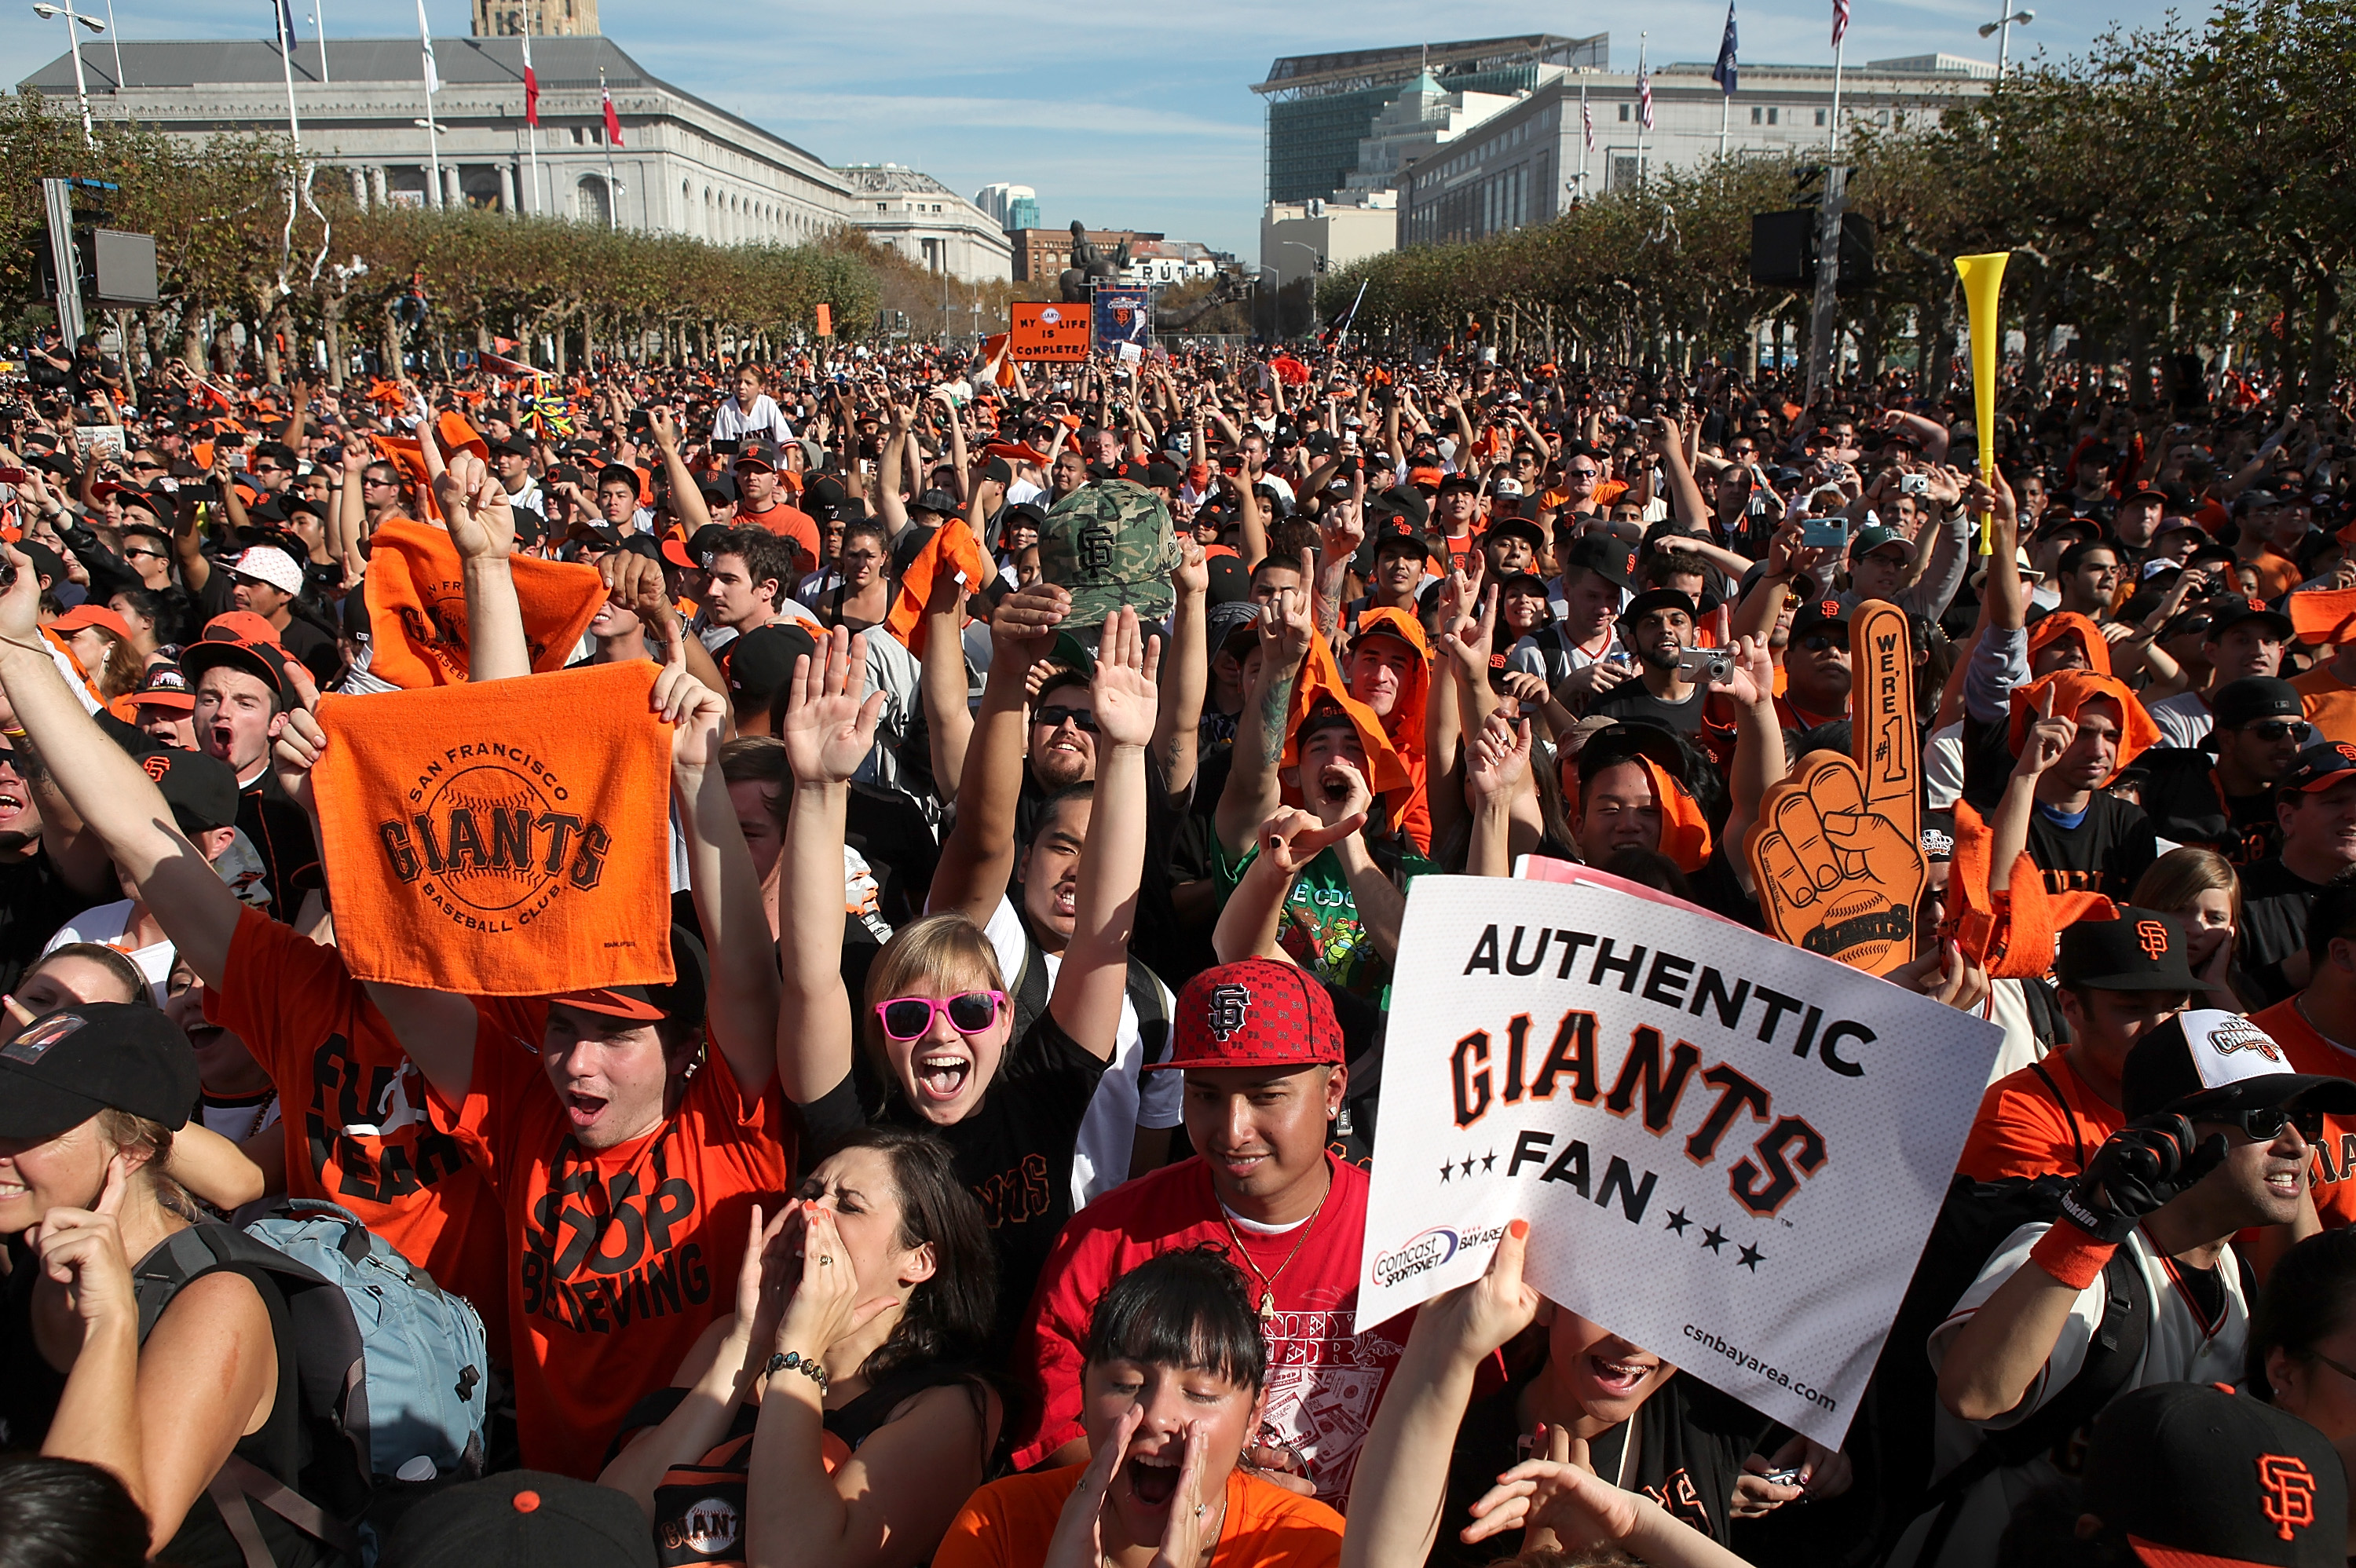 San Francisco Giants fans cheer on World Series champions